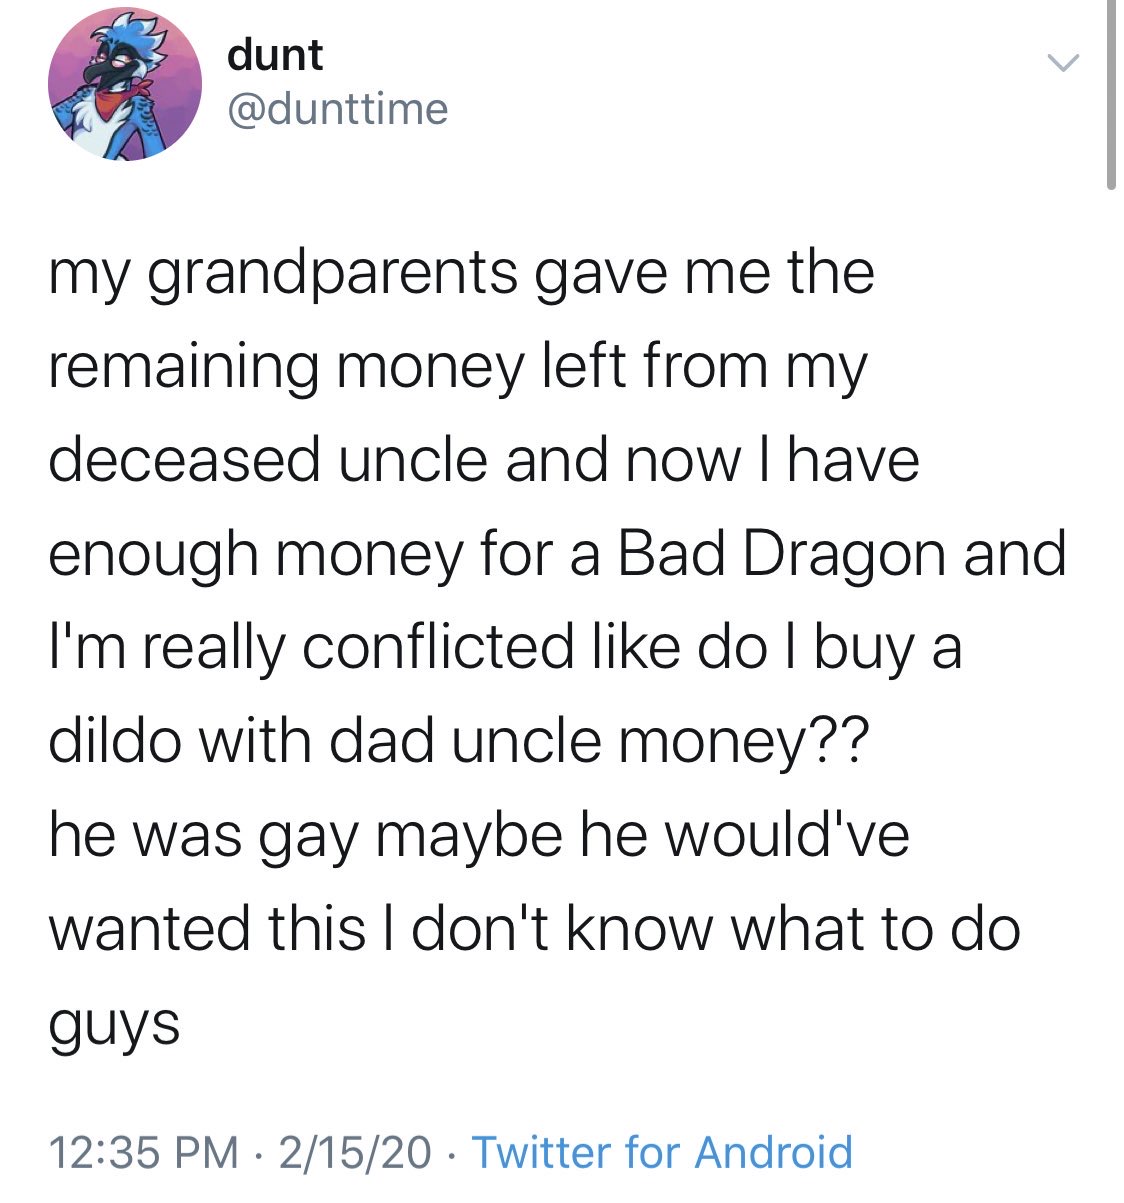 document - dunt dunt my grandparents gave me the remaining money left from my deceased uncle and now I have enough money for a Bad Dragon and I'm really conflicted do I buy a dildo with dad uncle money?? he was gay maybe he would've wanted this I don't kn